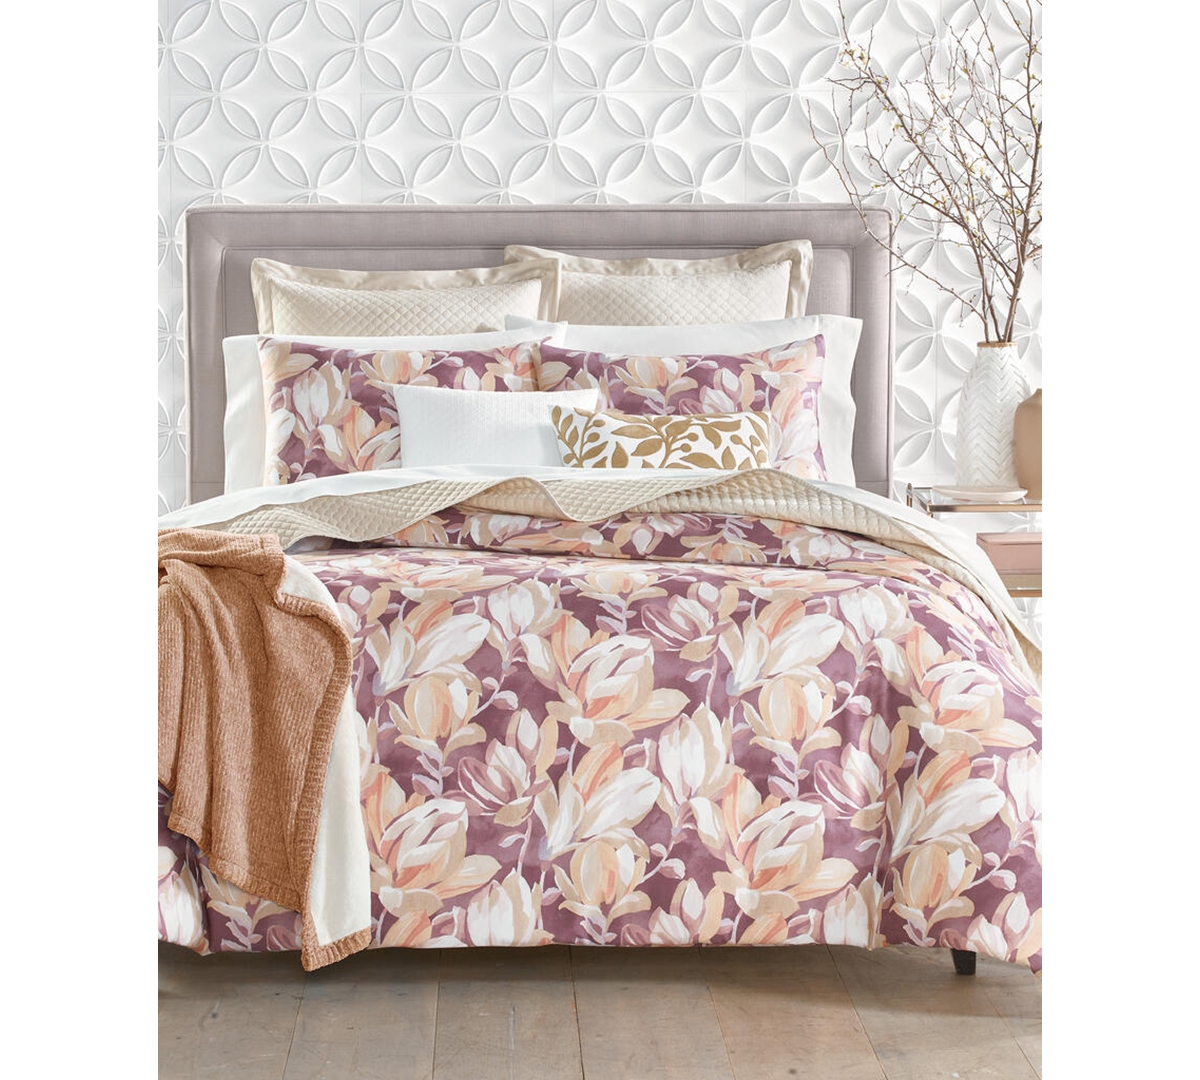 Charter Club Damask Designs Magnolia Cotton 3-pc. Duvet Cover Set, Full/queen, Created For Macy's In Purple